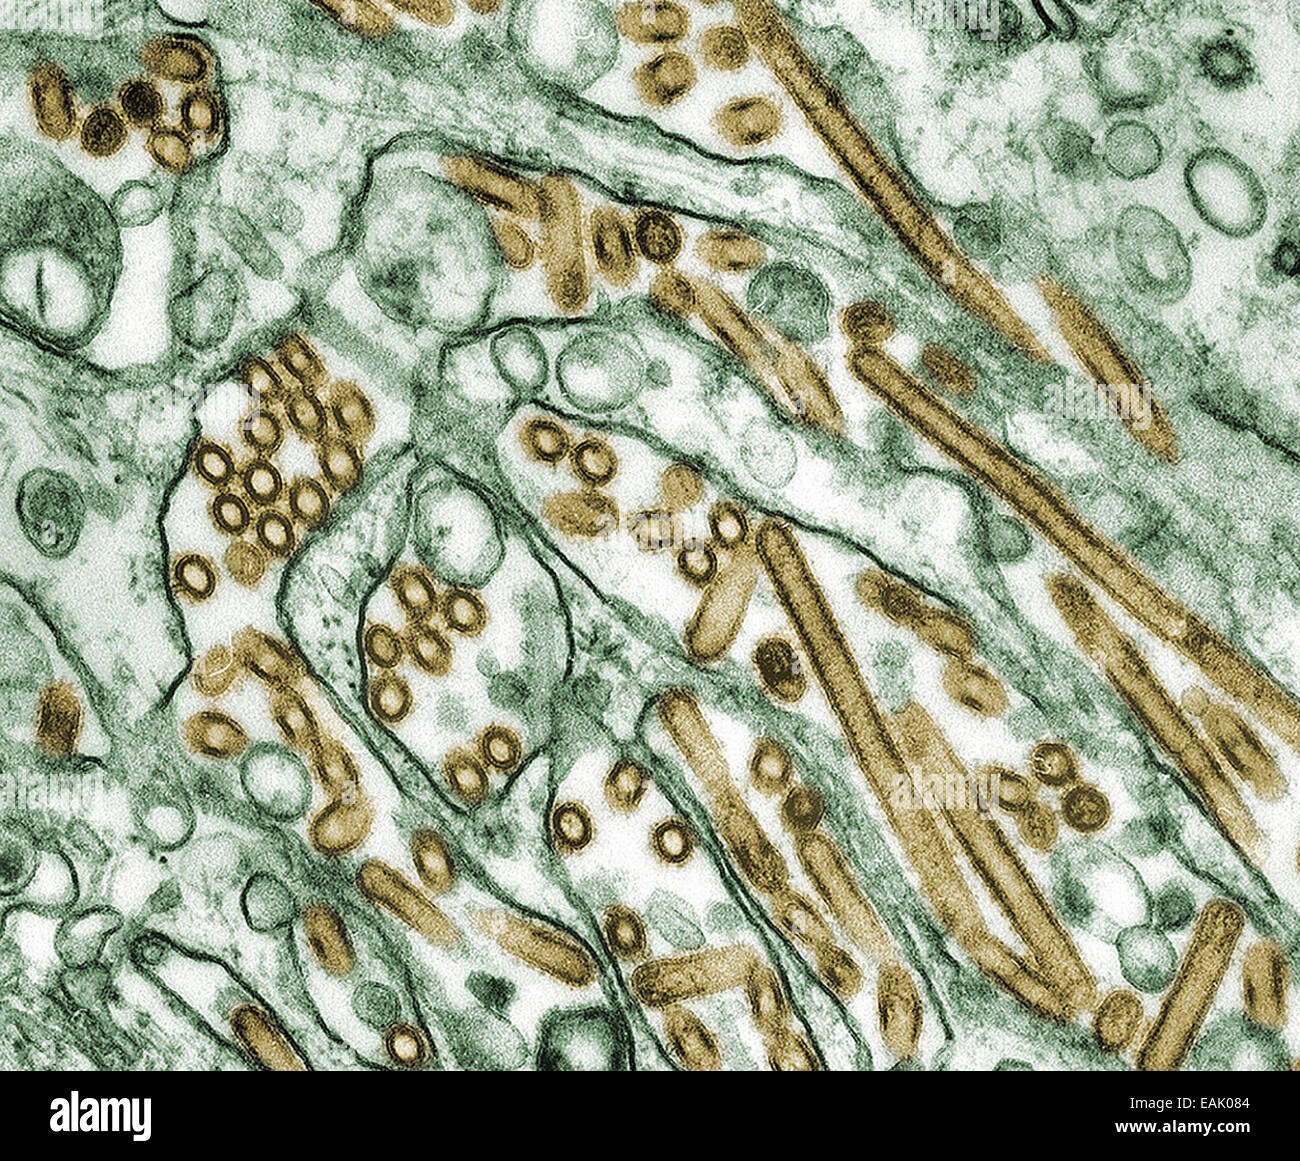 Colorized transmission electron micrograph of Avian influenza A H5N1 viruses. Content Providers: CDC/ Courtesy of Cynthia Goldsm Stock Photo